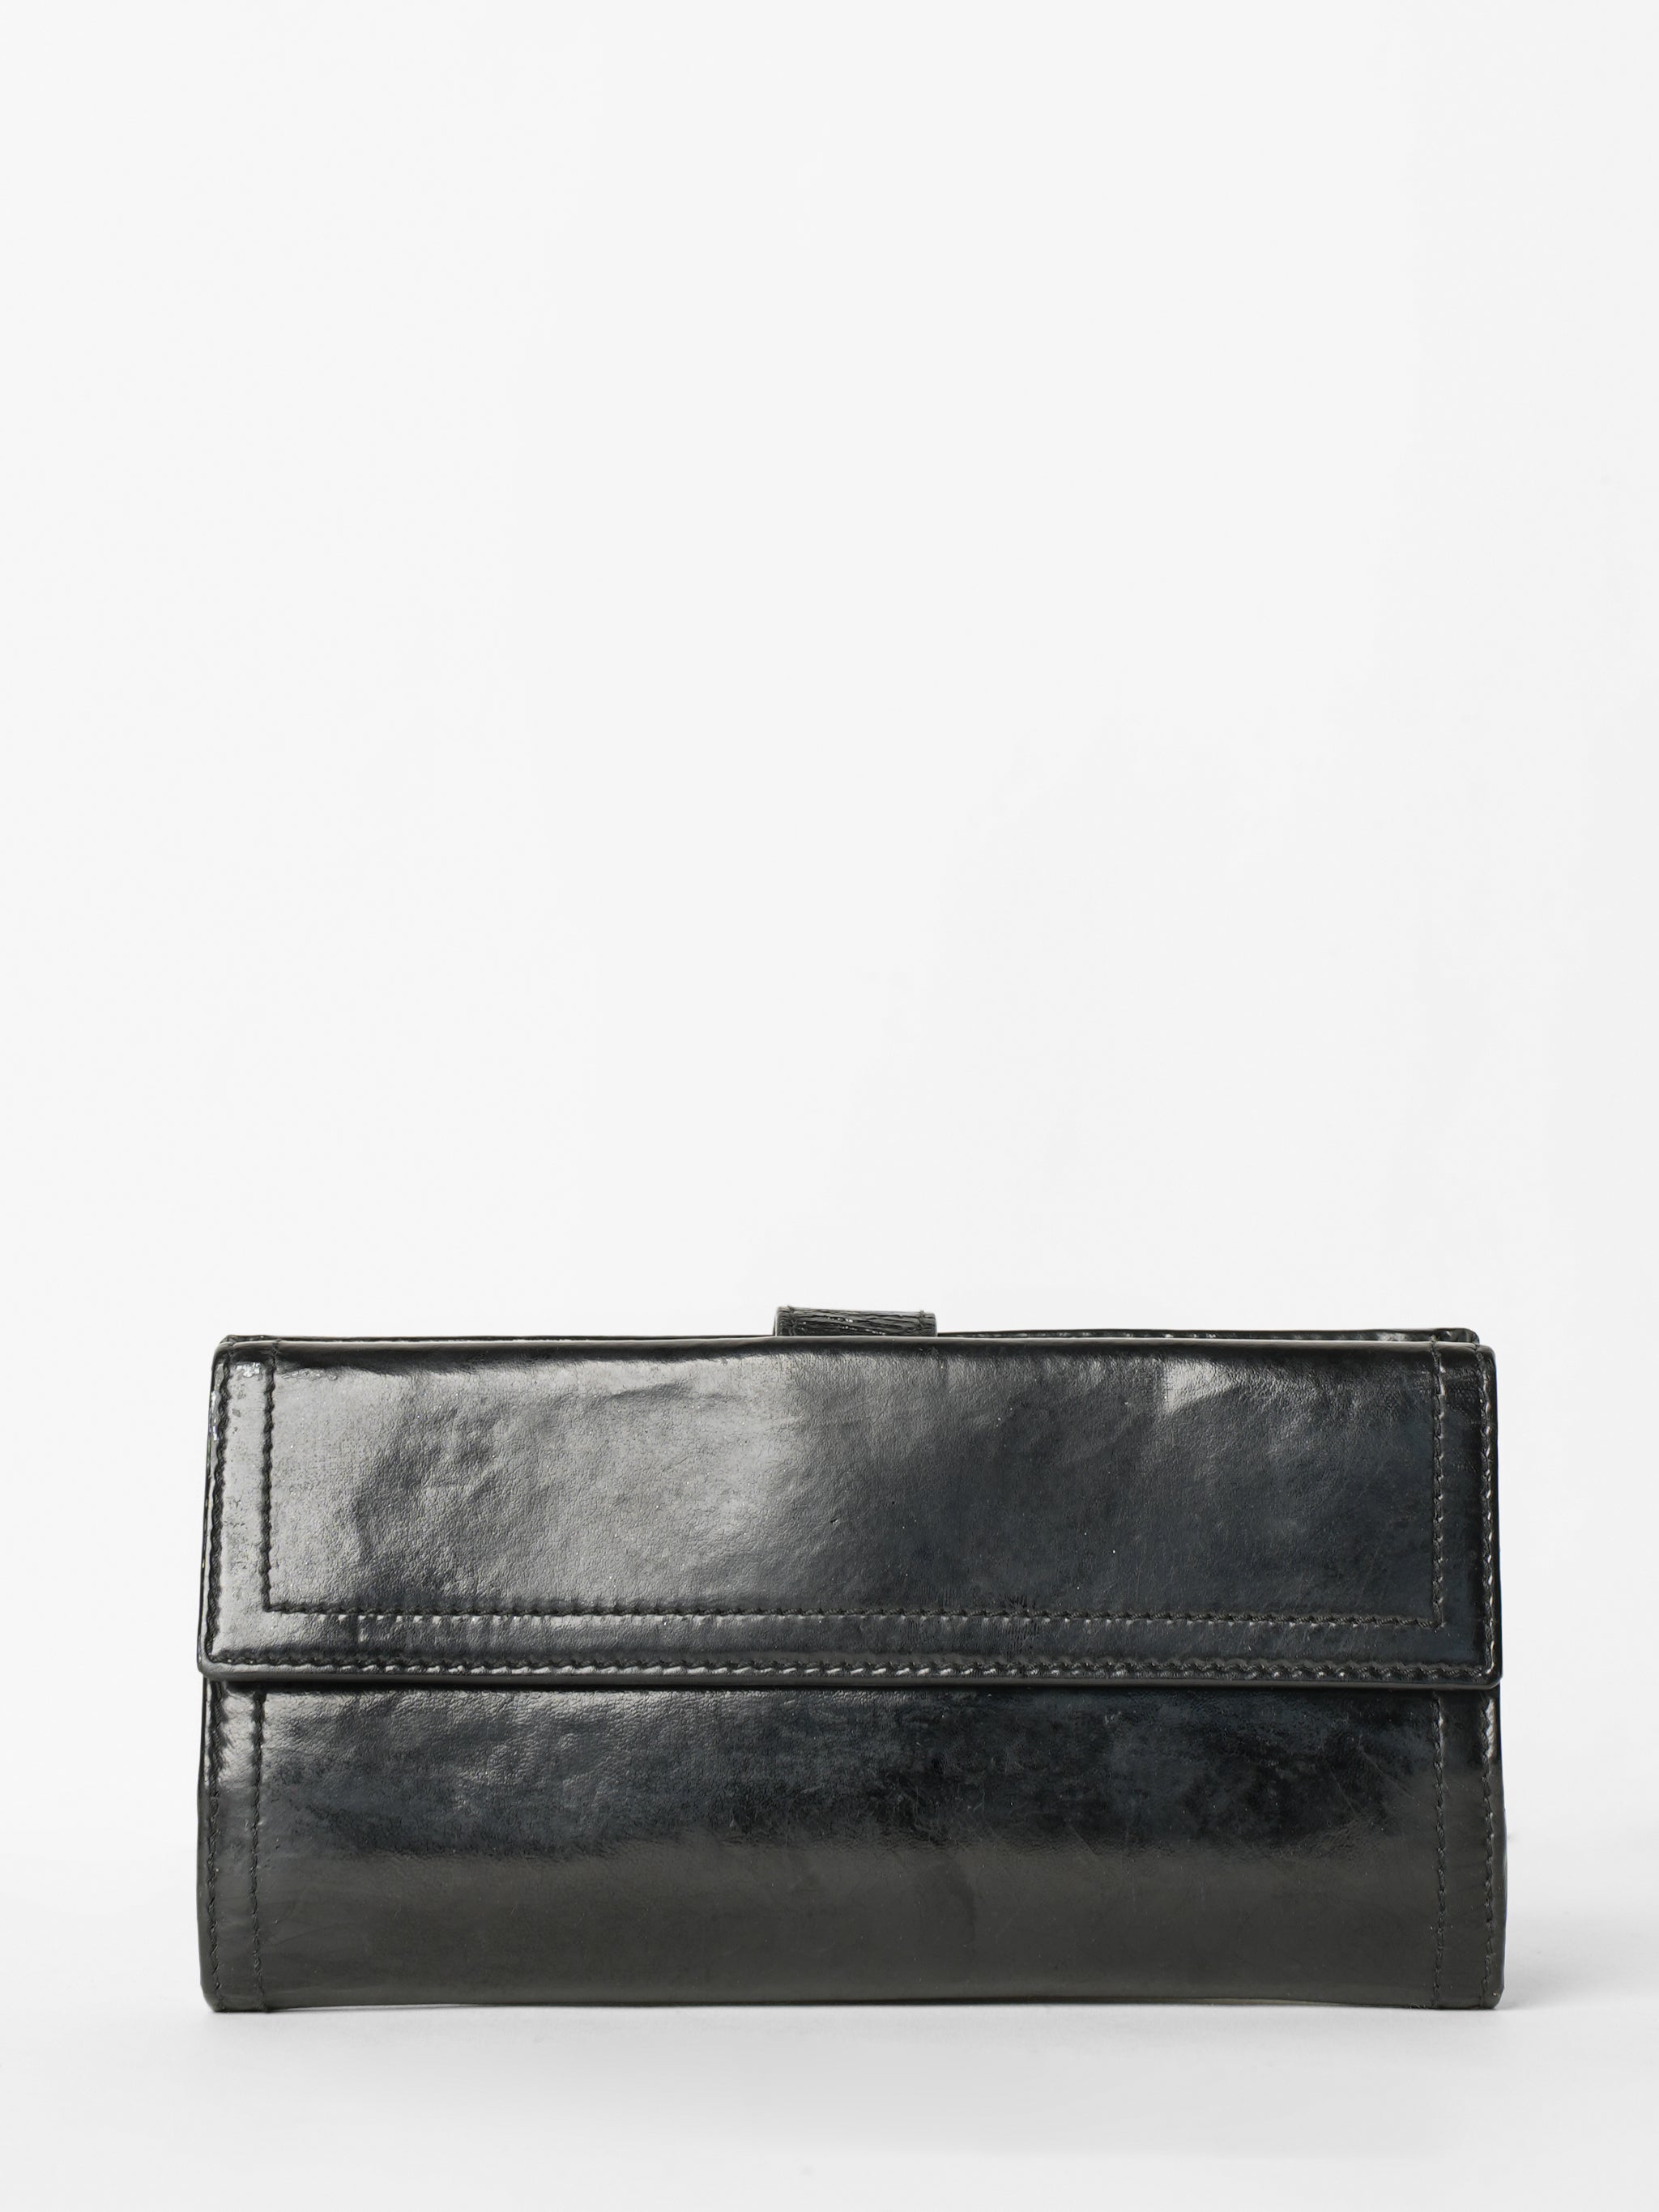 Gucci Black Leather Hysteria Wallet